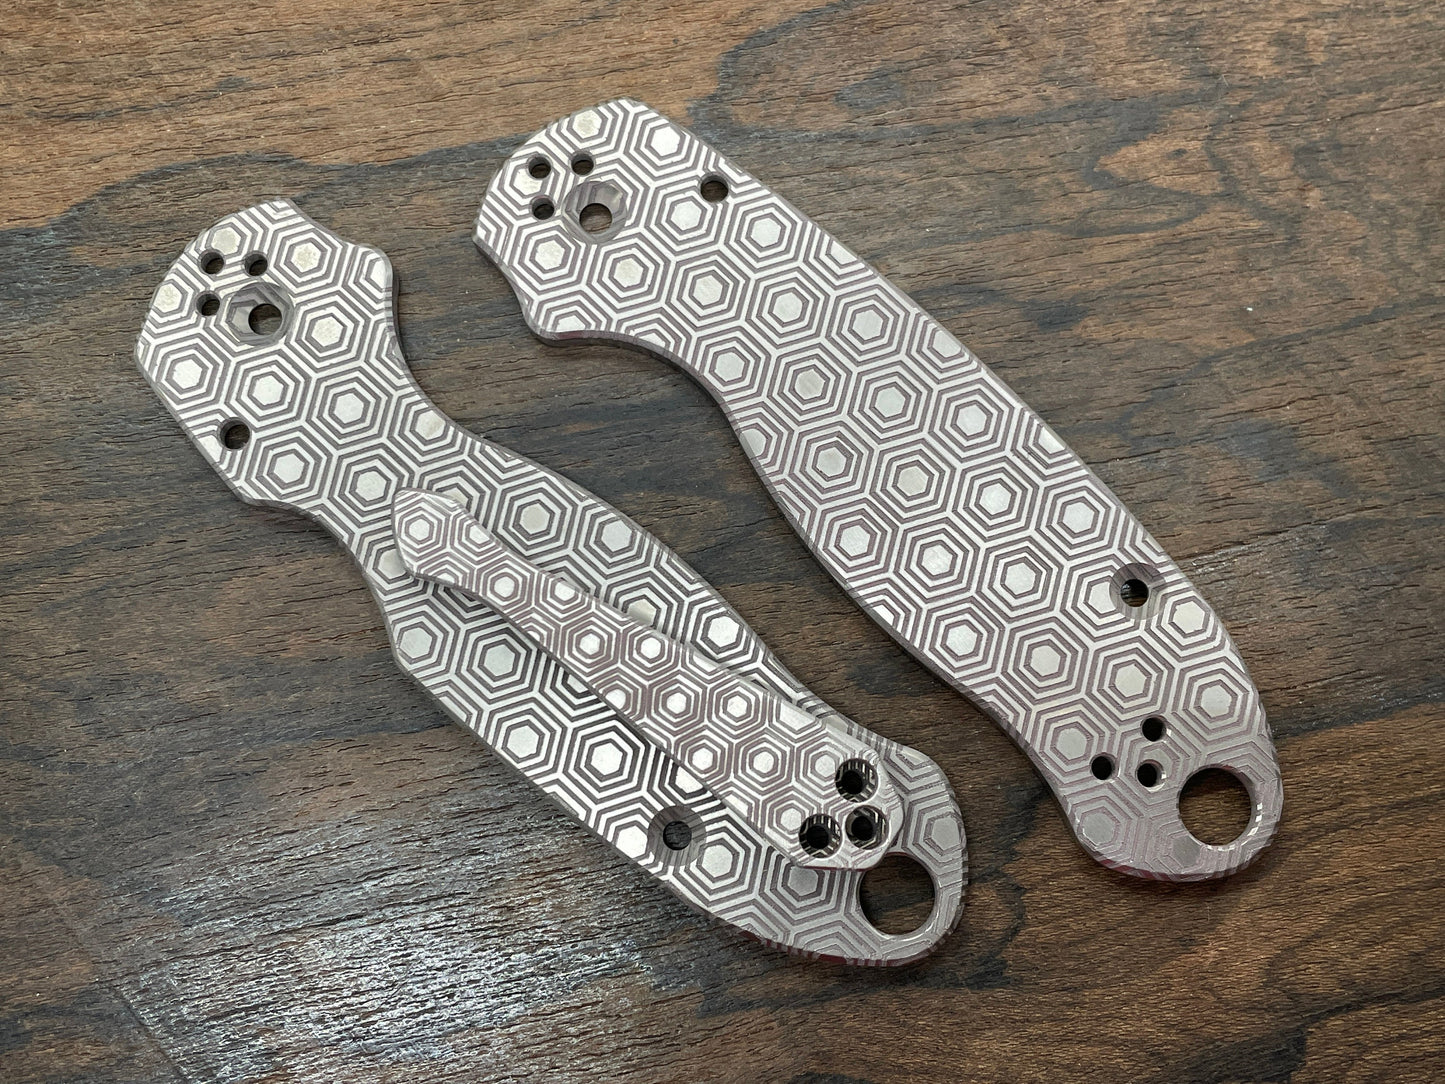 Flamed HONEYCOMB engraved SPIDY Titanium CLIP for most Spyderco models